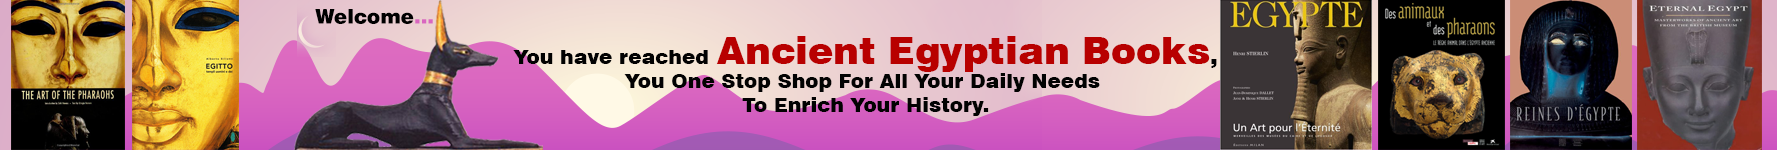 builders of egypt publishers